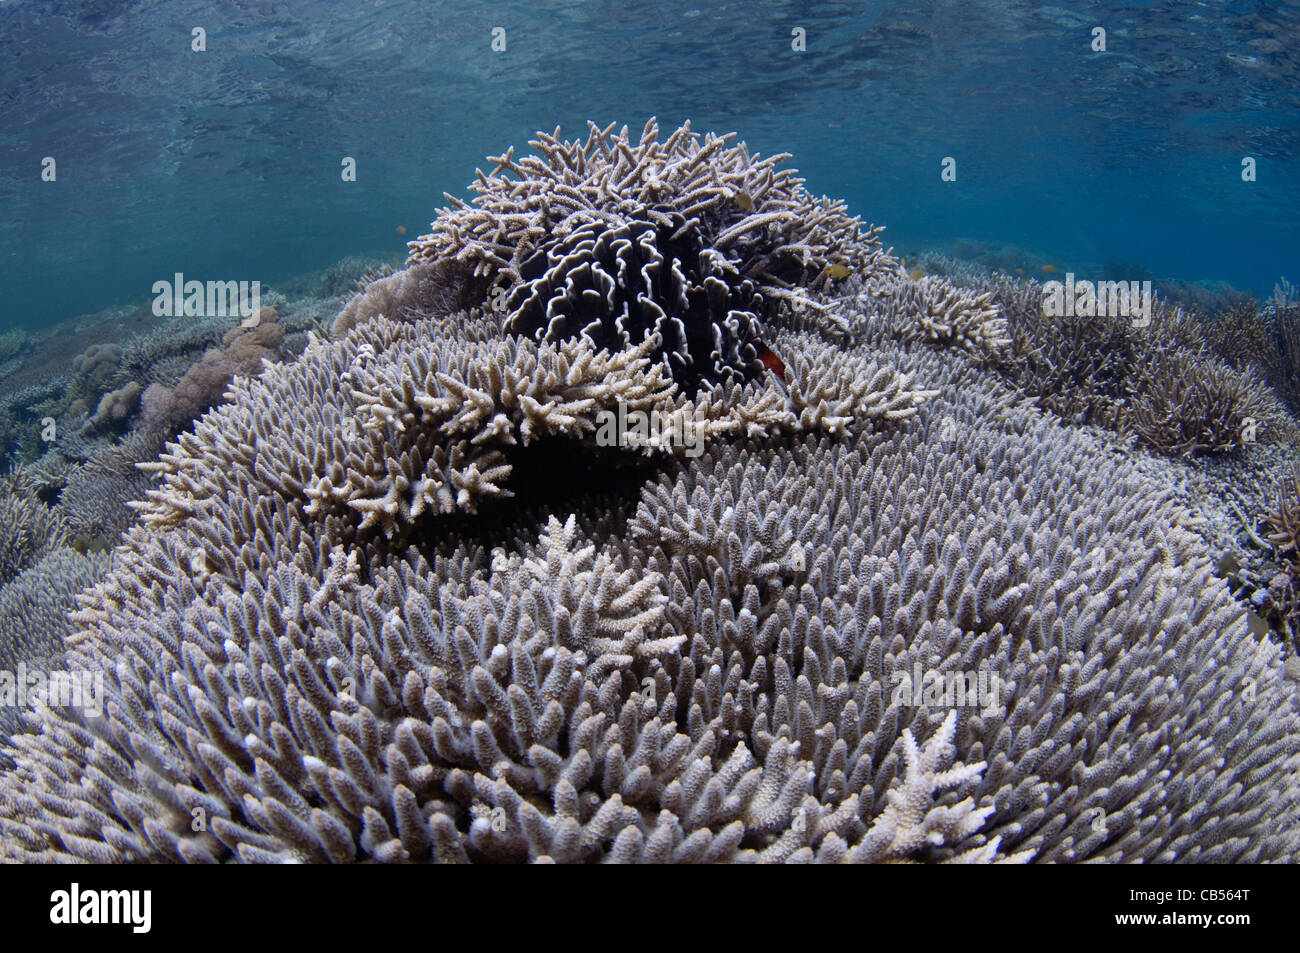 Hard coral garden with a variety of table, leather, and staghorn corals, Acropora sp., Porites sp., Litophyton sp. Stock Photo